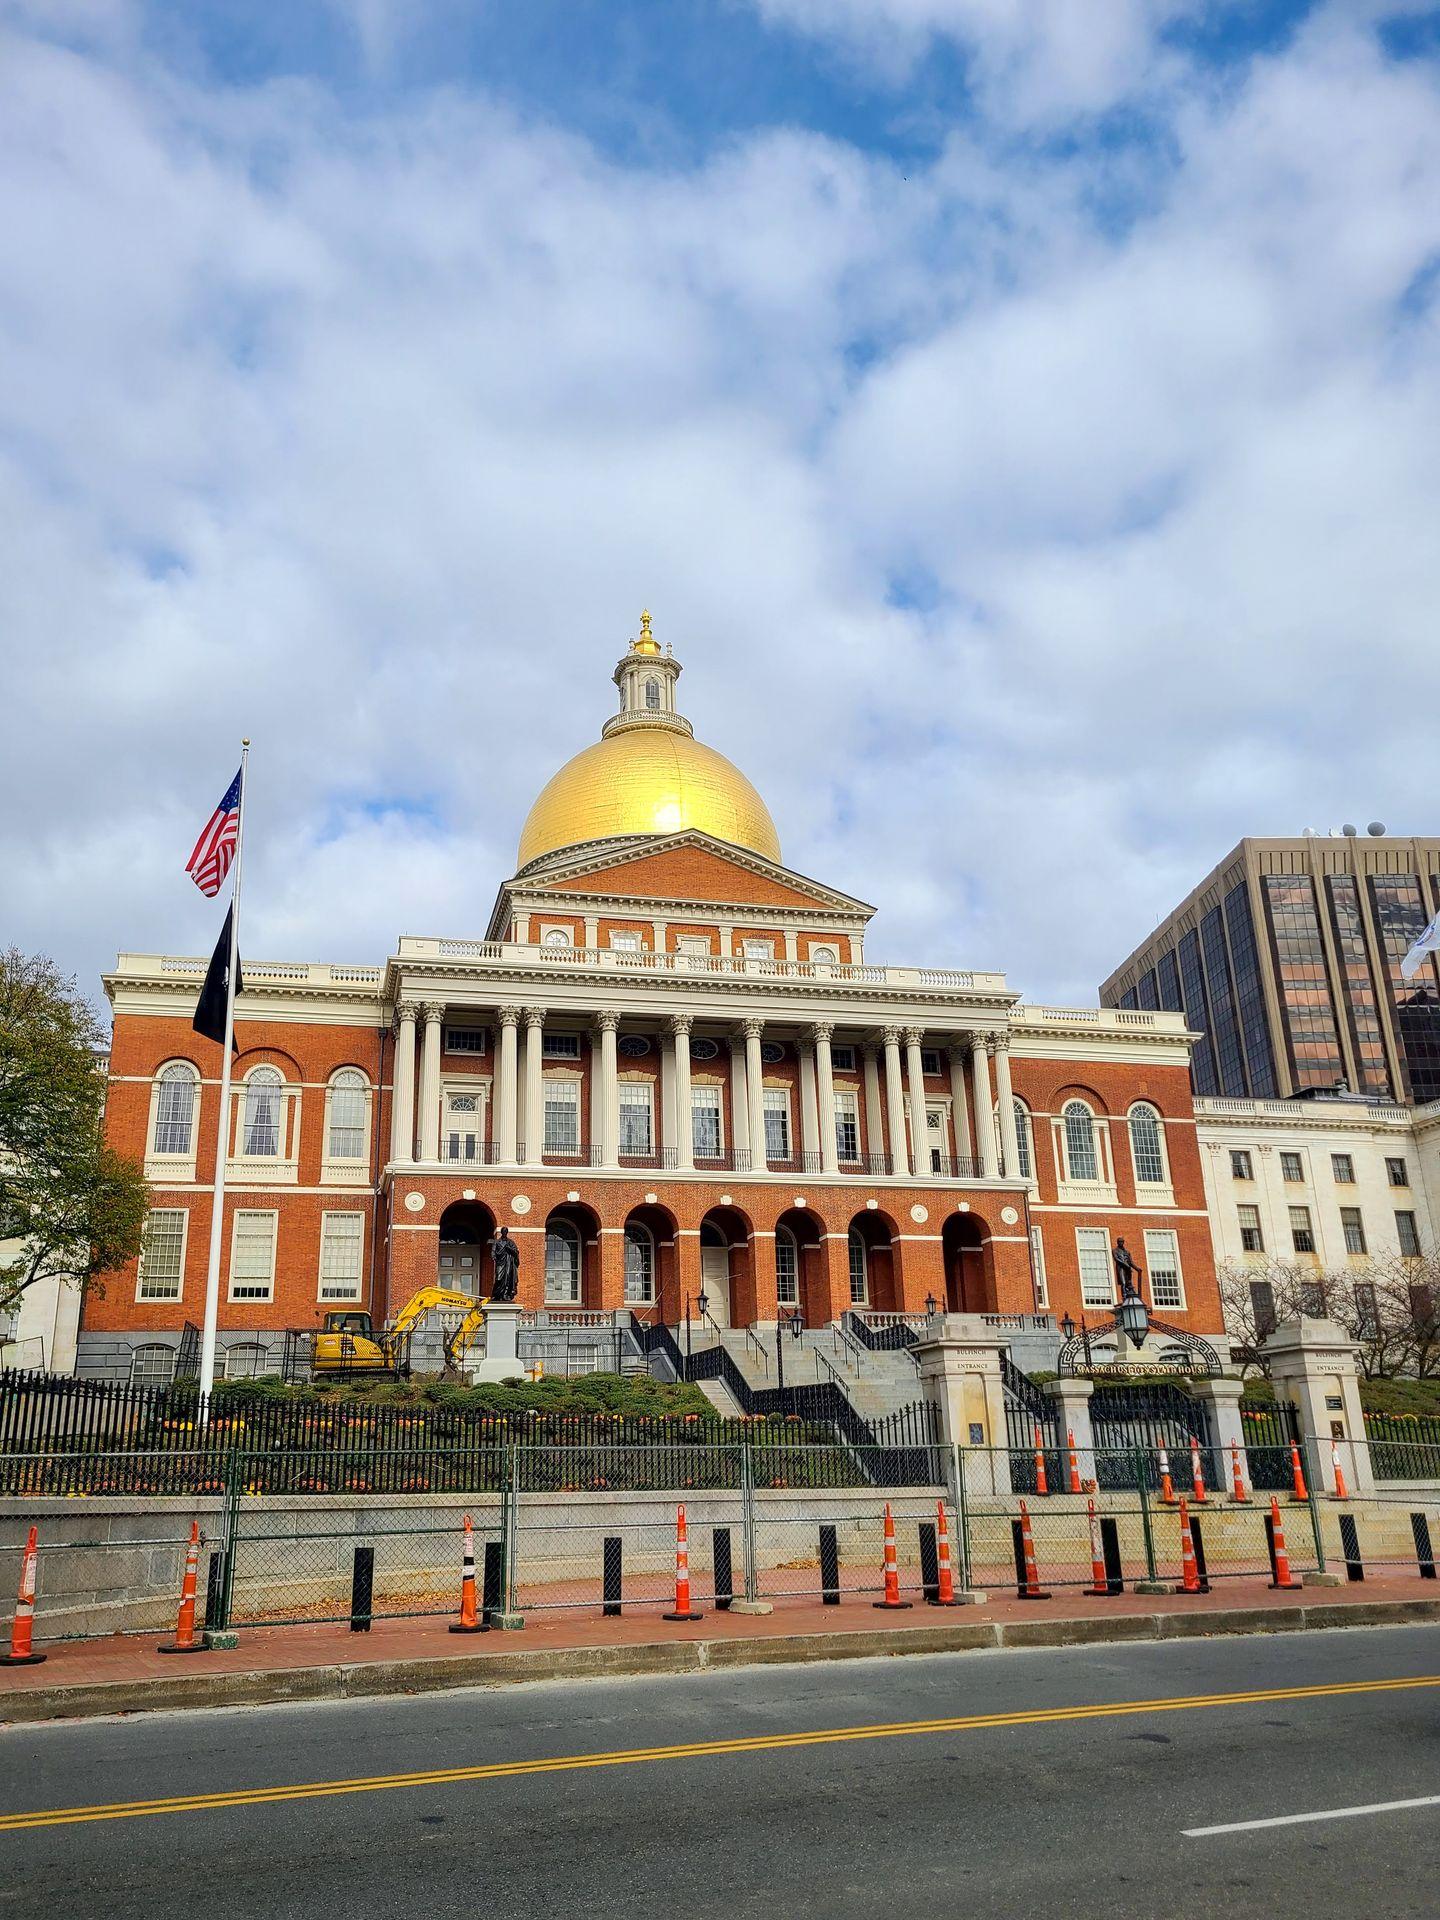 A view of the Massachusetts State House from across the street. The dome at the top is made of gold.